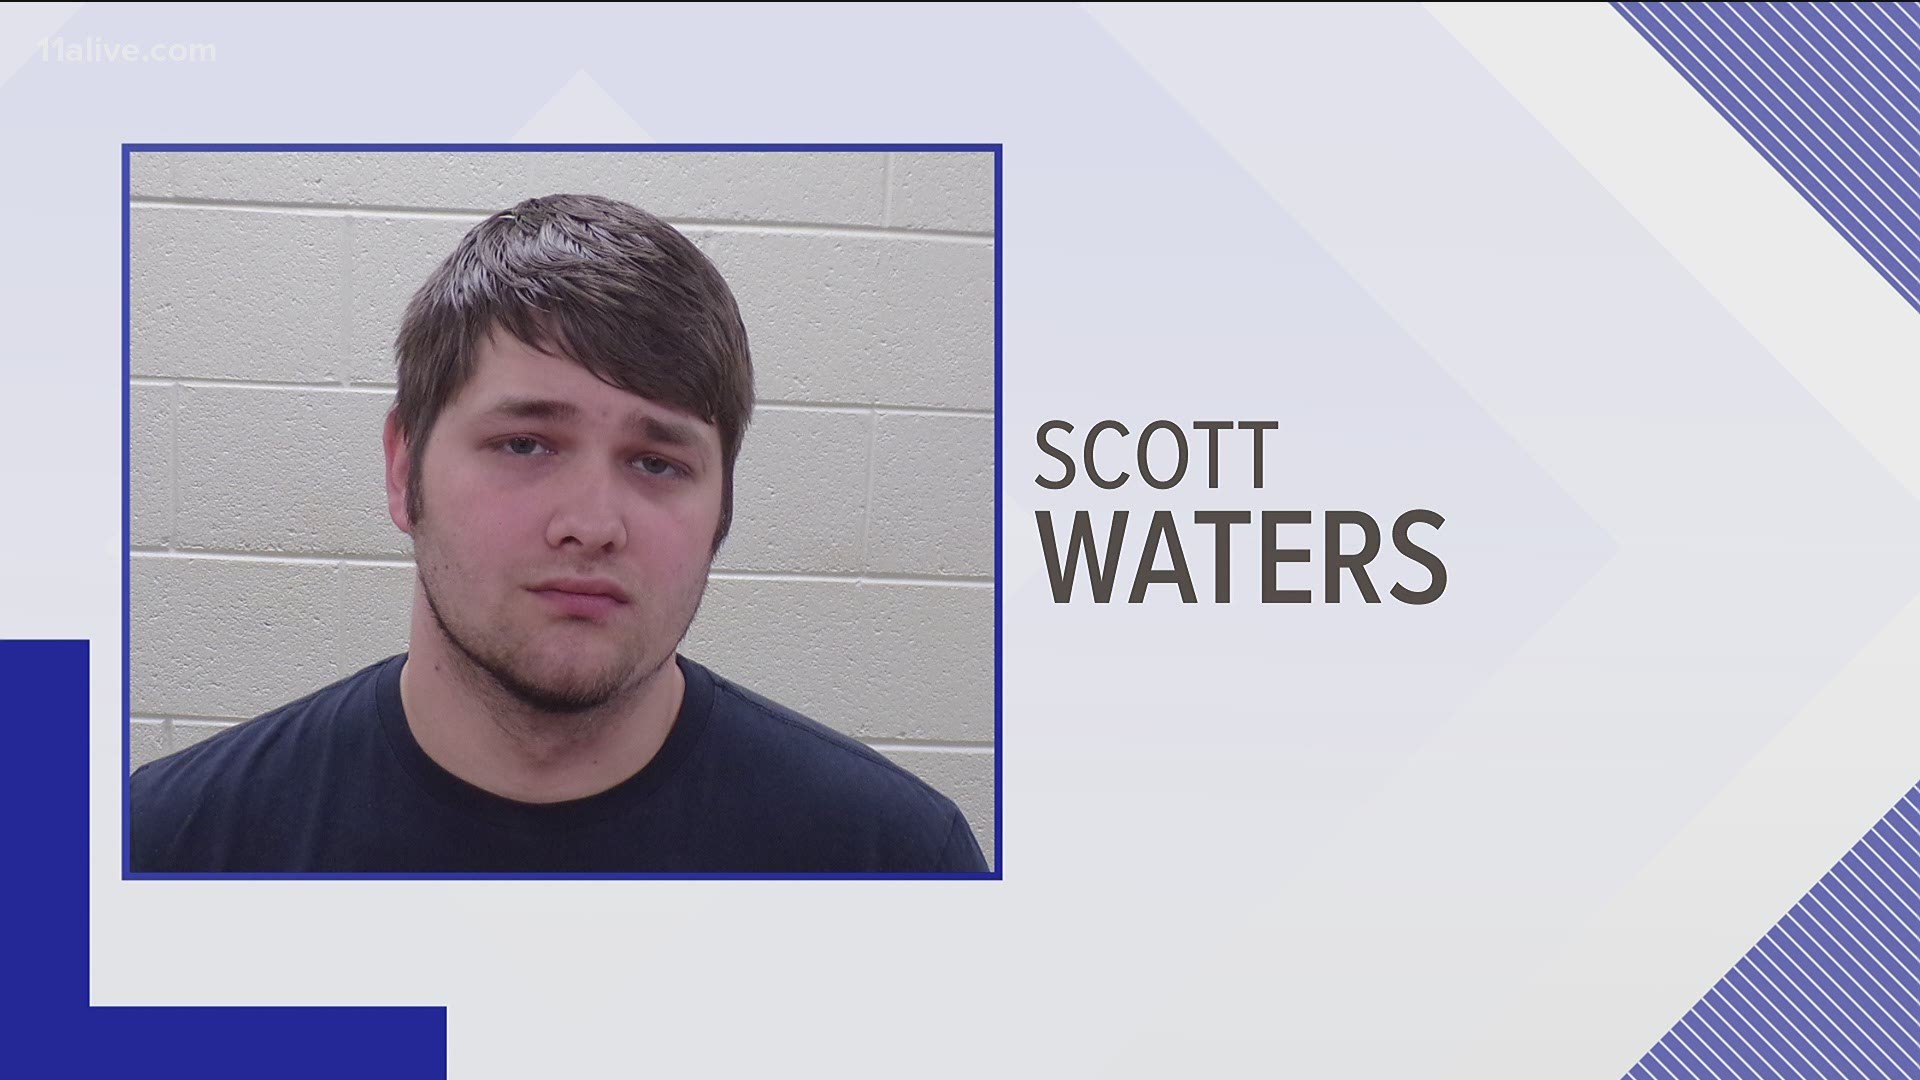 Scott Waters is charged with cruelty to children, aggravated battery and aggravated assault.